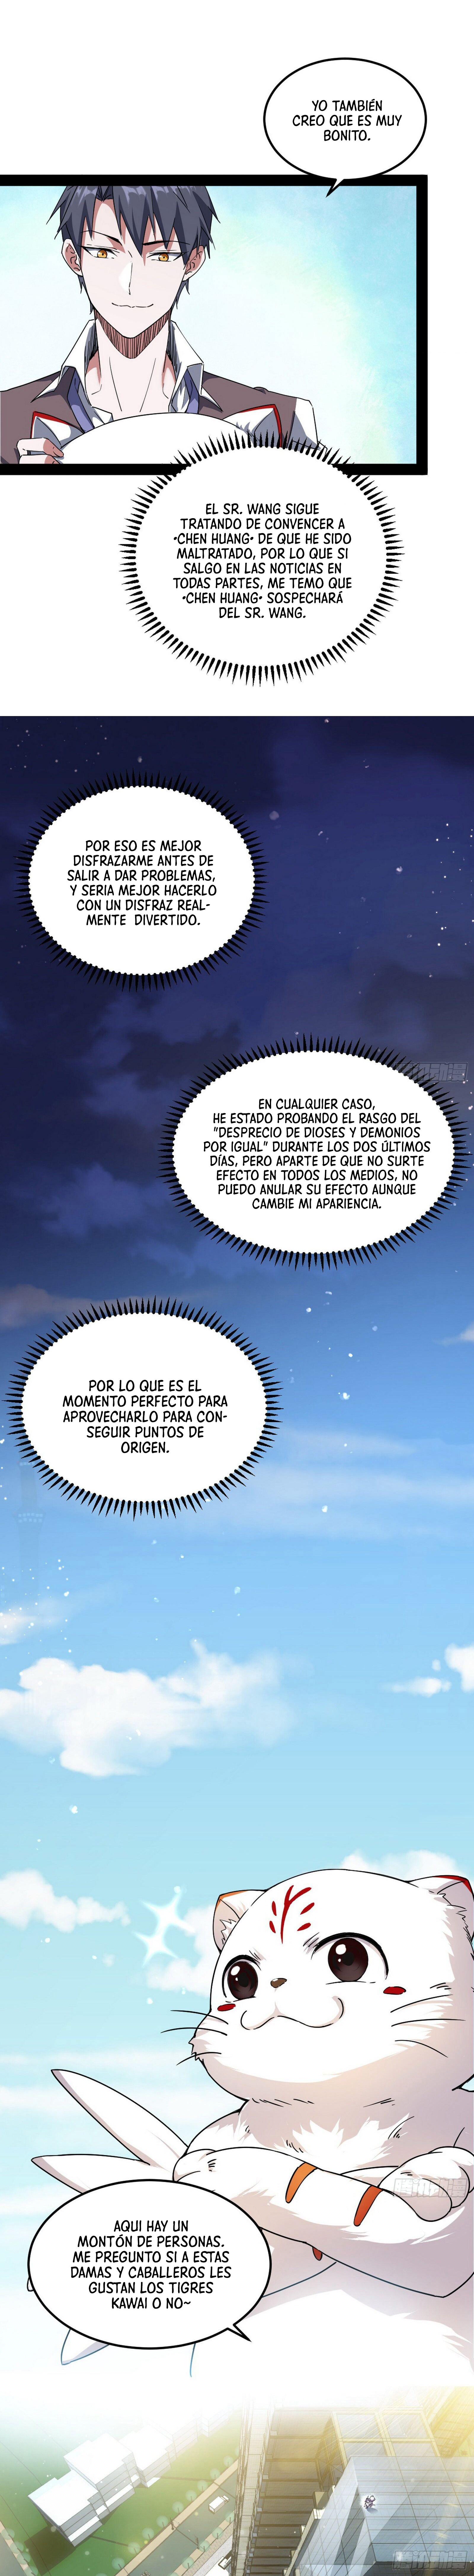 Manga Soy un dios maligno Chapter 98 image number 3